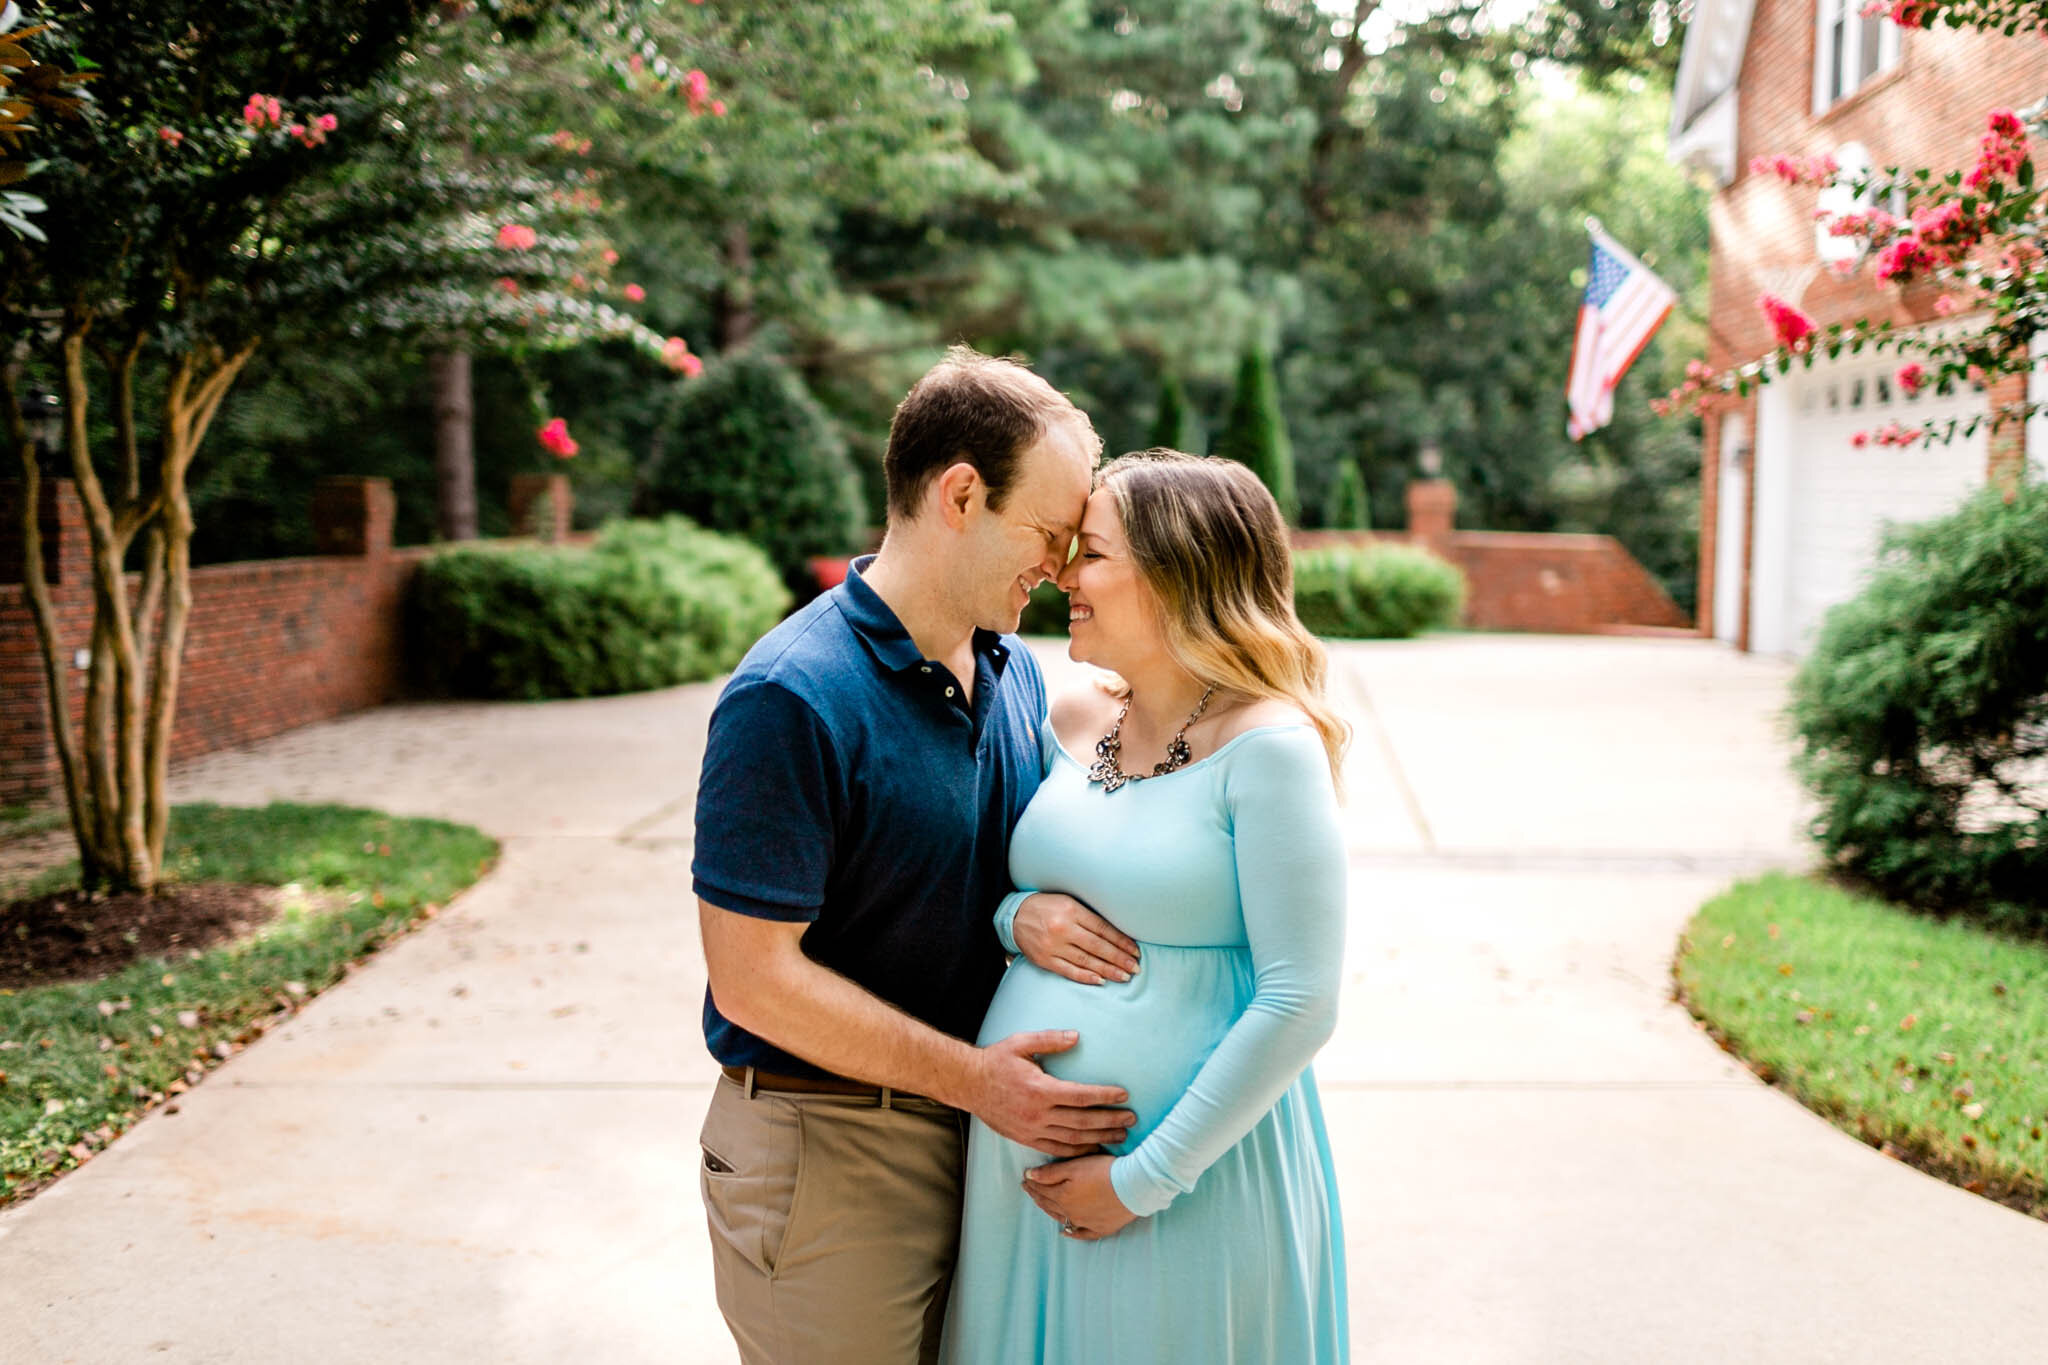 Raleigh Maternity Photographer | By G. Lin Photography | Man and woman smiling and holding baby bump